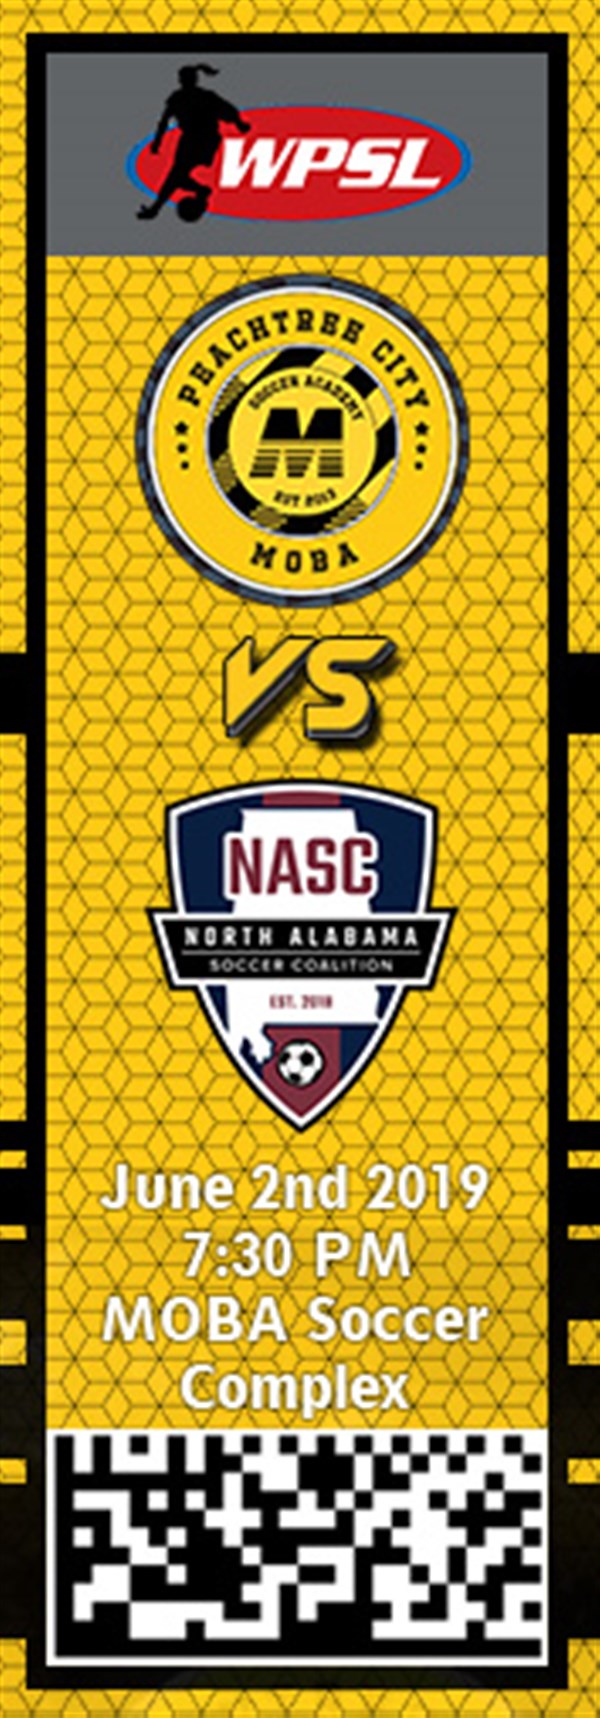 Get Information and buy tickets to PTC MOBA vs. NASC WPSL on MOBA Soccer Academy